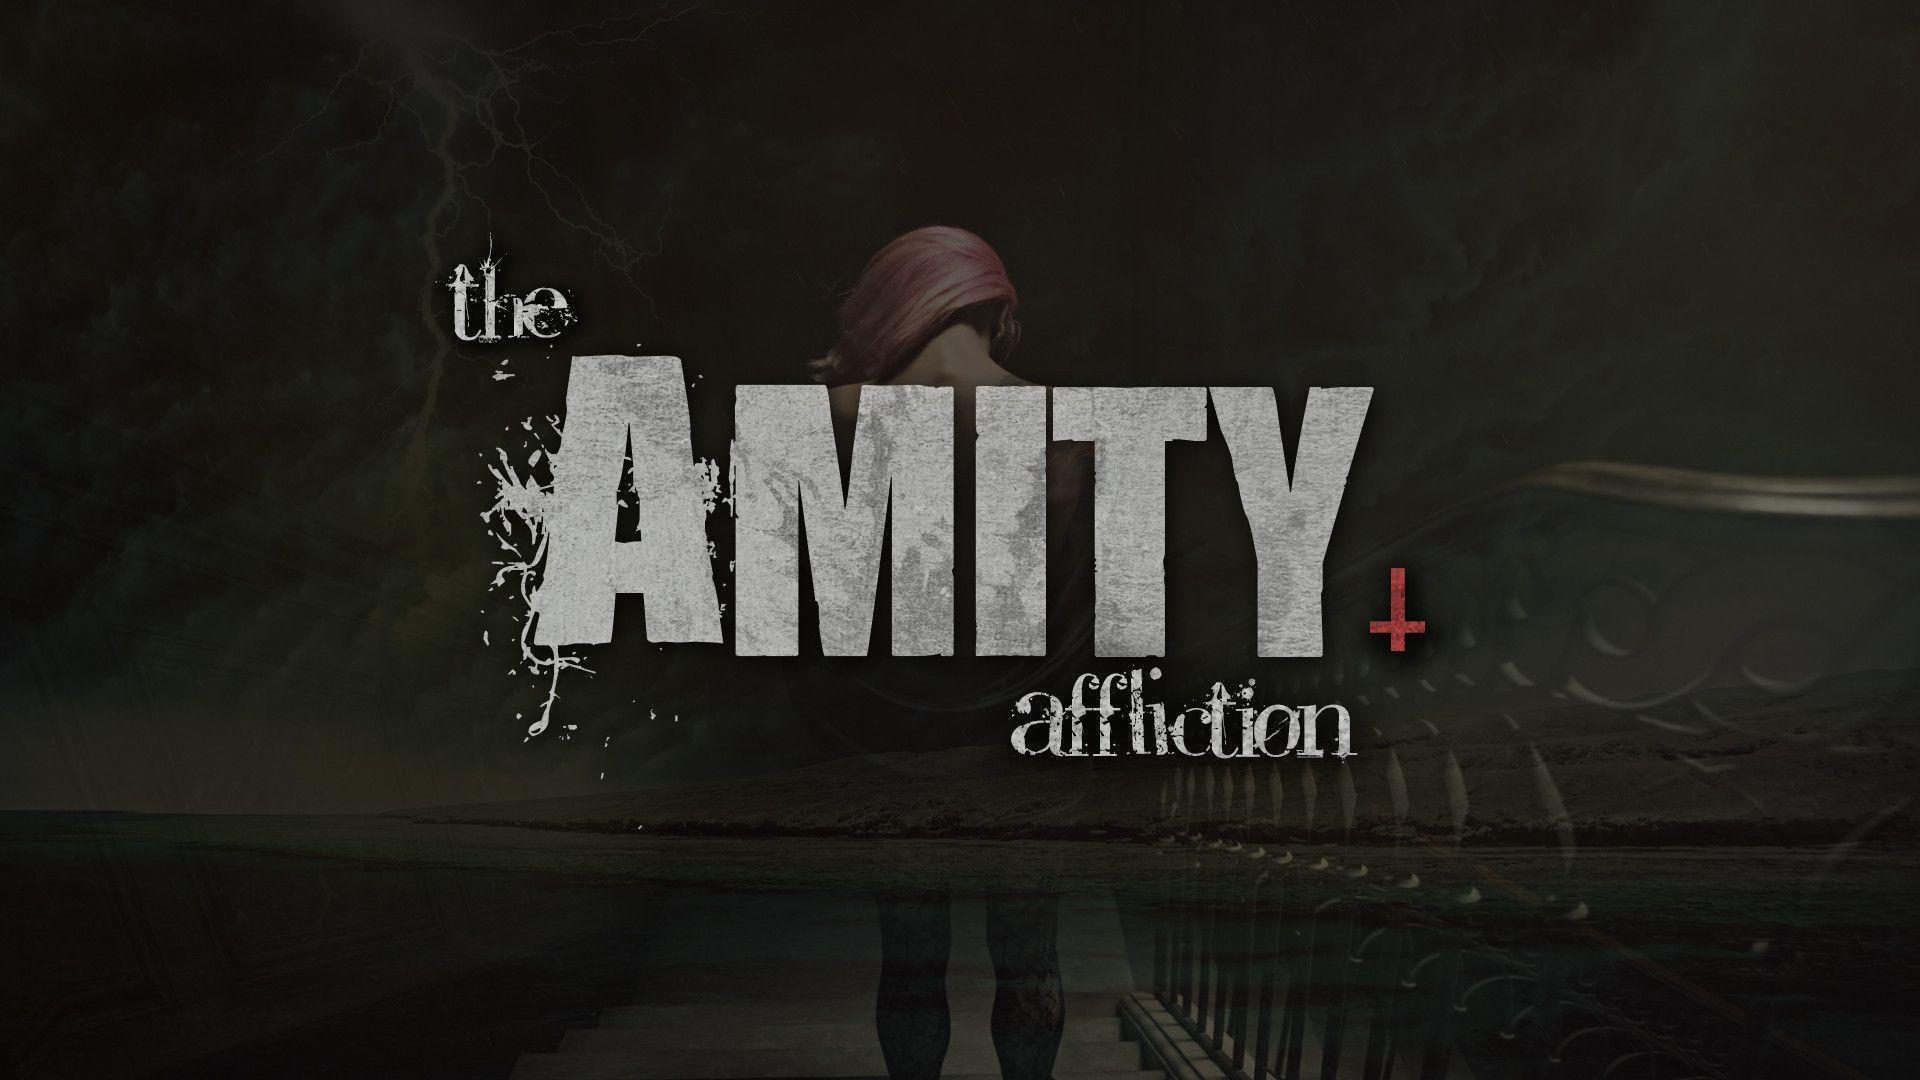 wallpaper as promised, here's one for The Amity Affliction